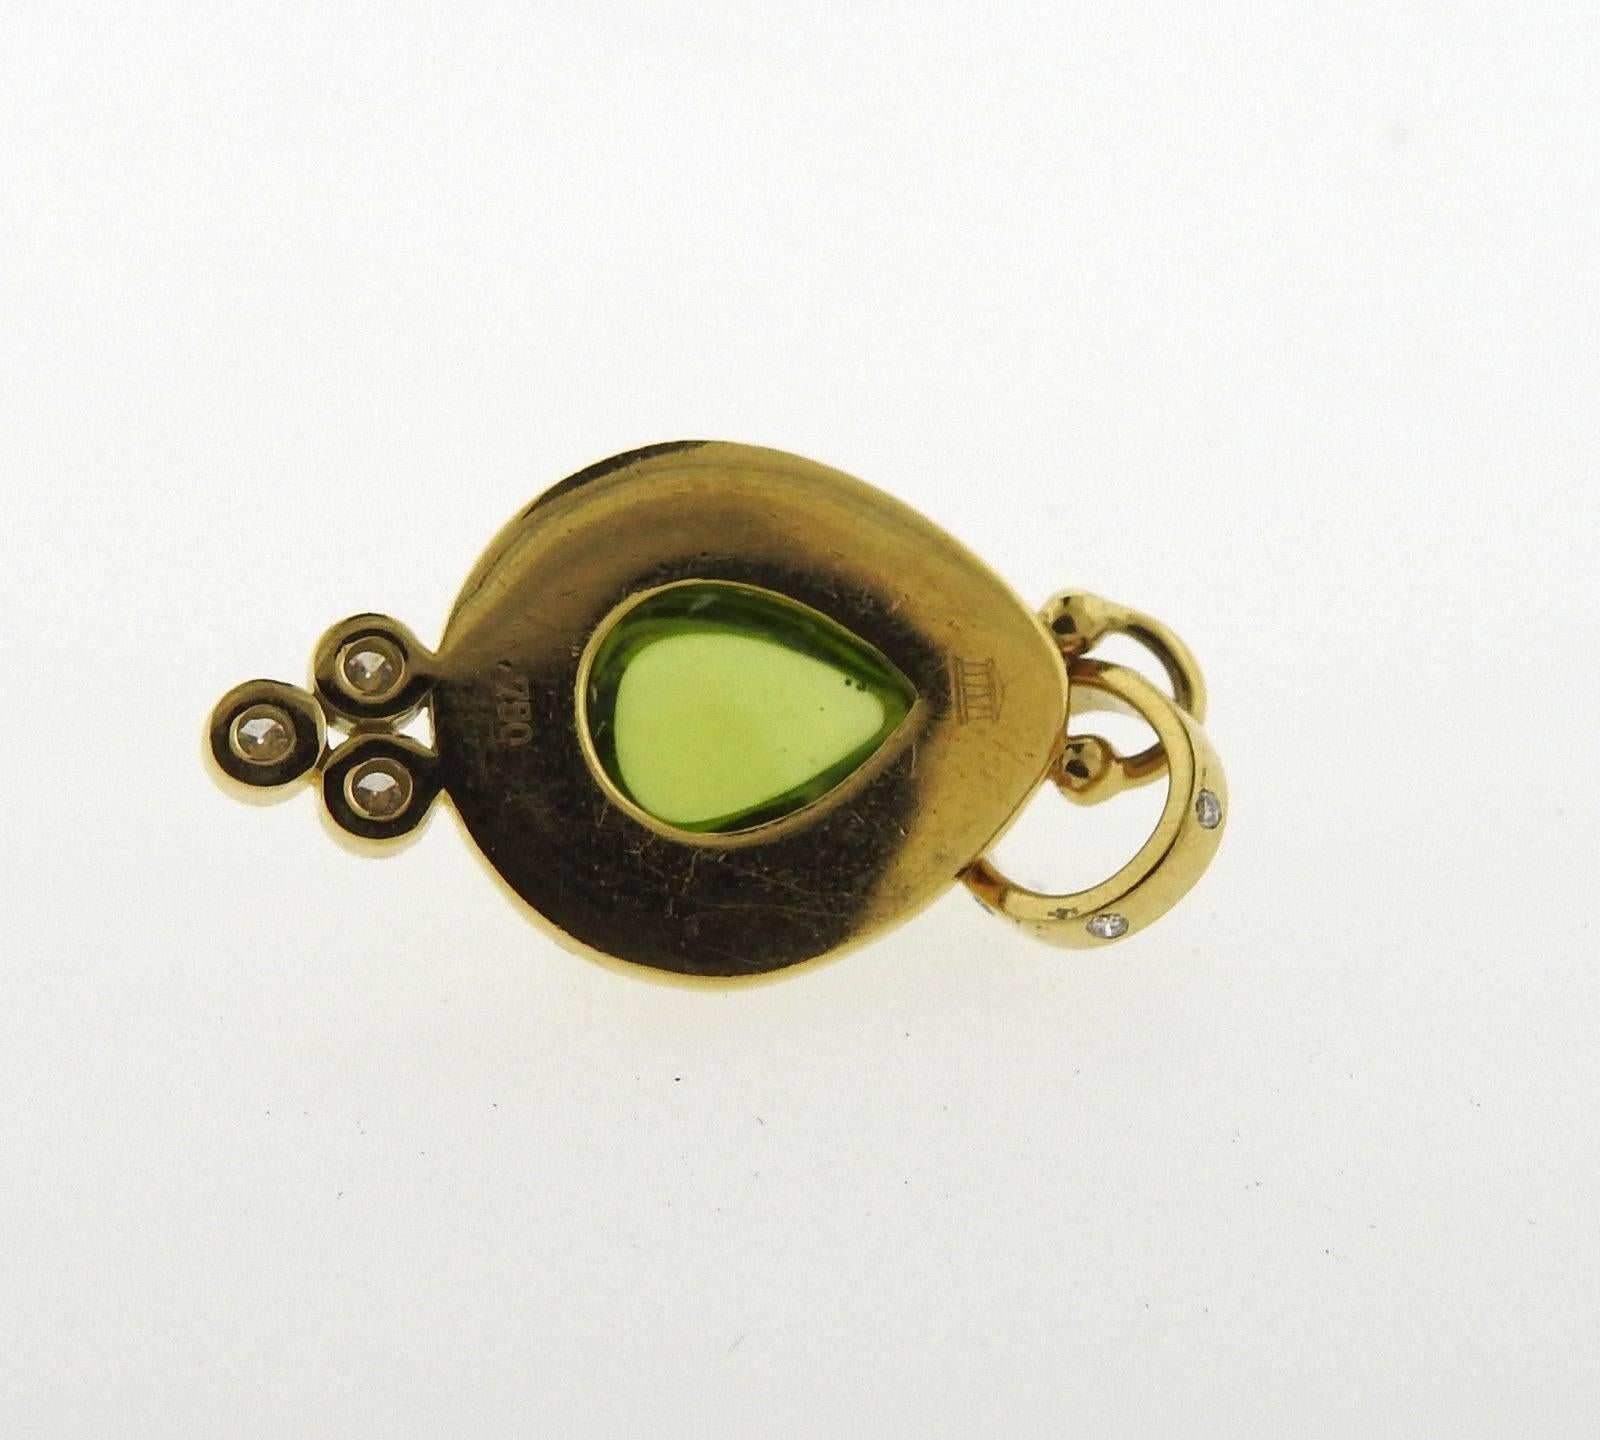 An 18k yellow gold pendant set with peridot and 0.35ctw of G/VS diamonds.  The pendant measures 30mm x 14mm and weighs 4 grams.  Marked: Temple mark, 750.  Current retail is $2700.